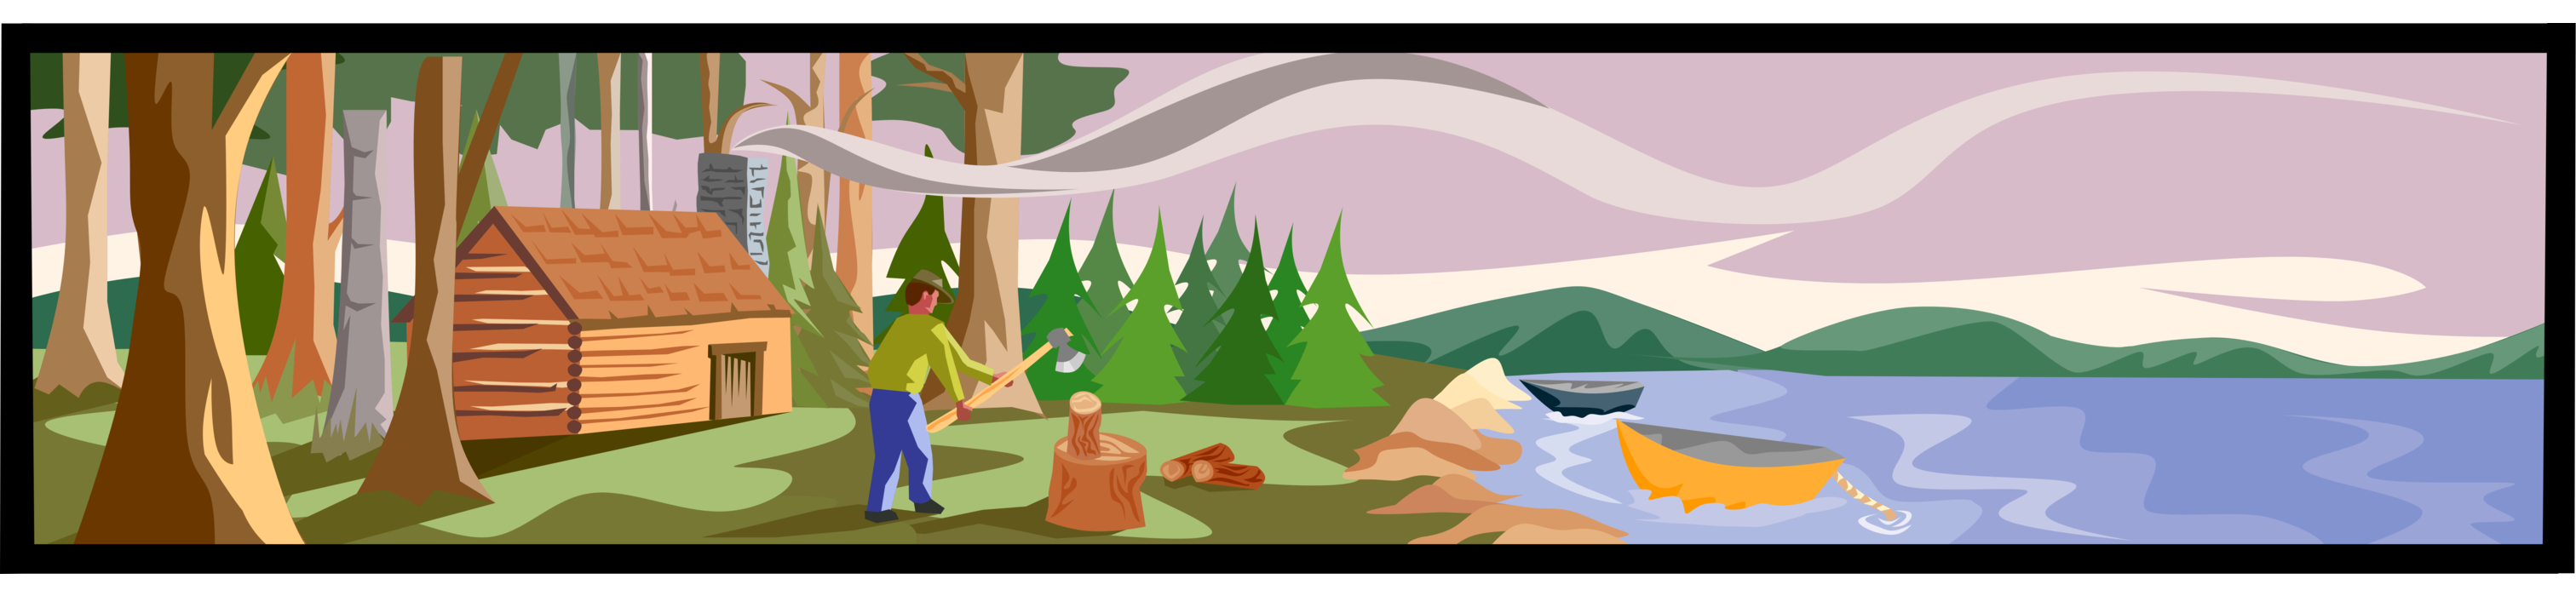 Vector Illustration of Cottage or Cabin in Woods with Lake and Canoes and Splitting Firewood with Axe